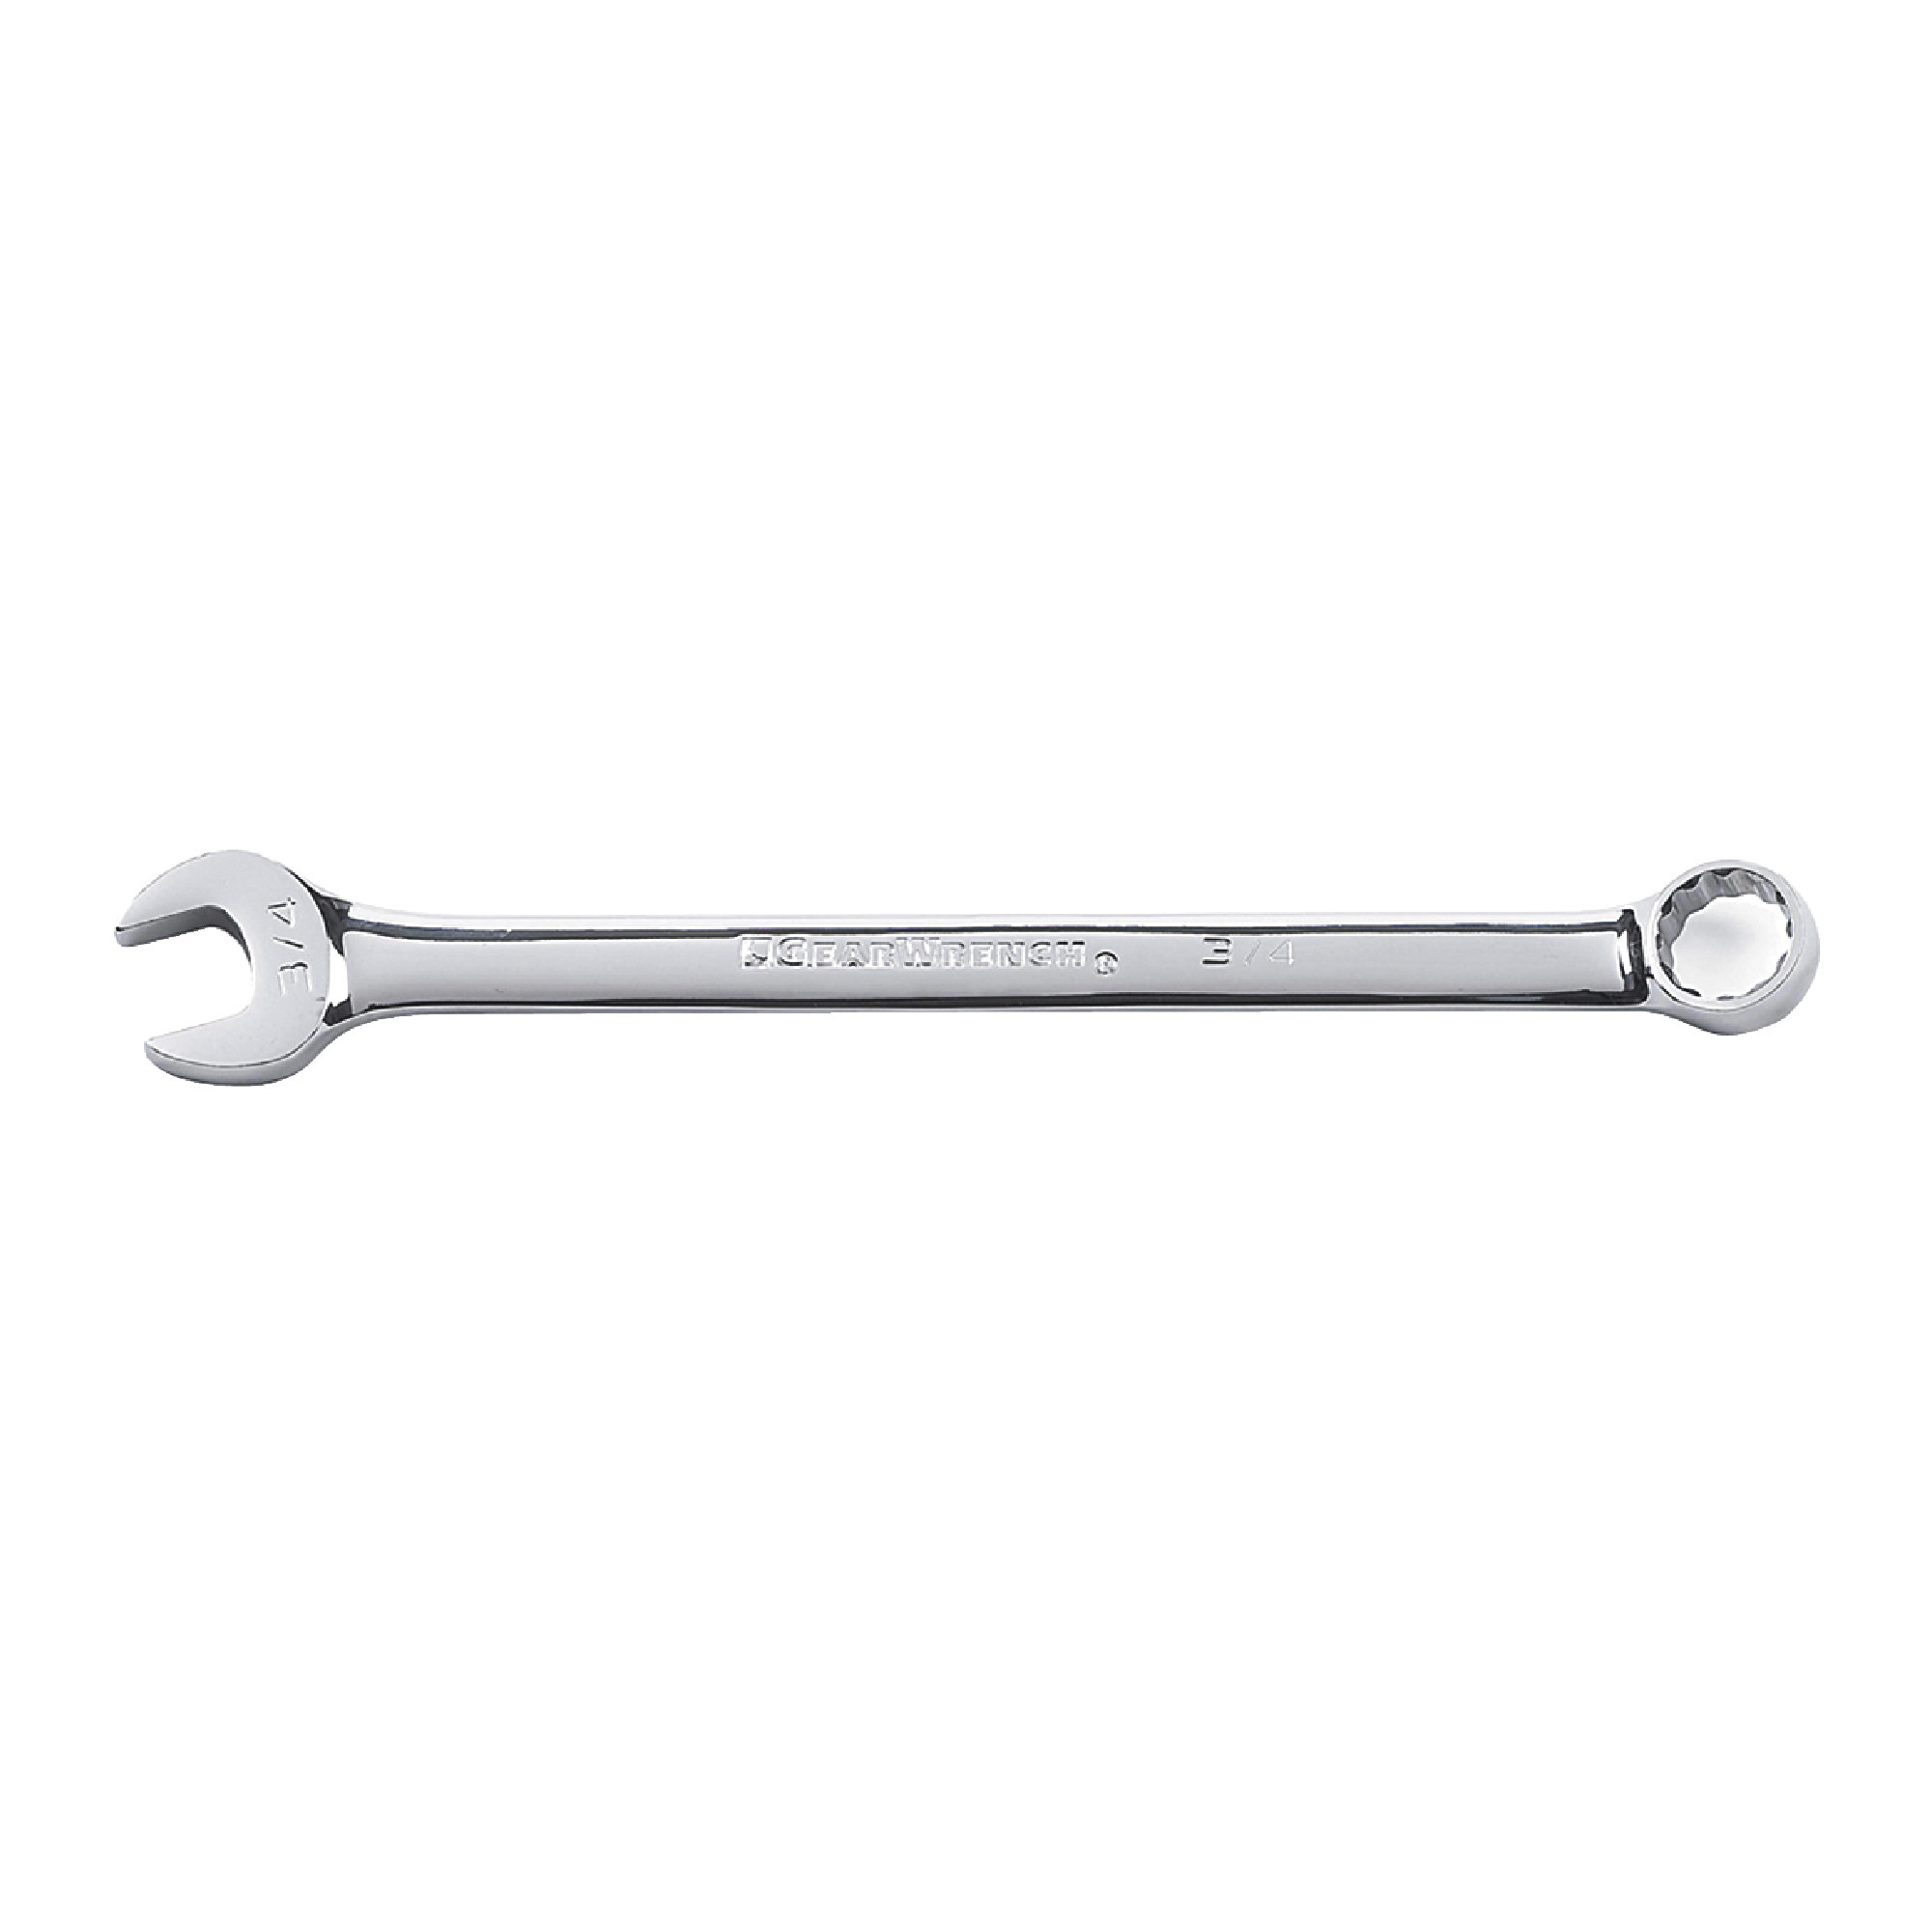 15mm 12 Point Long Pattern Combination Wrench